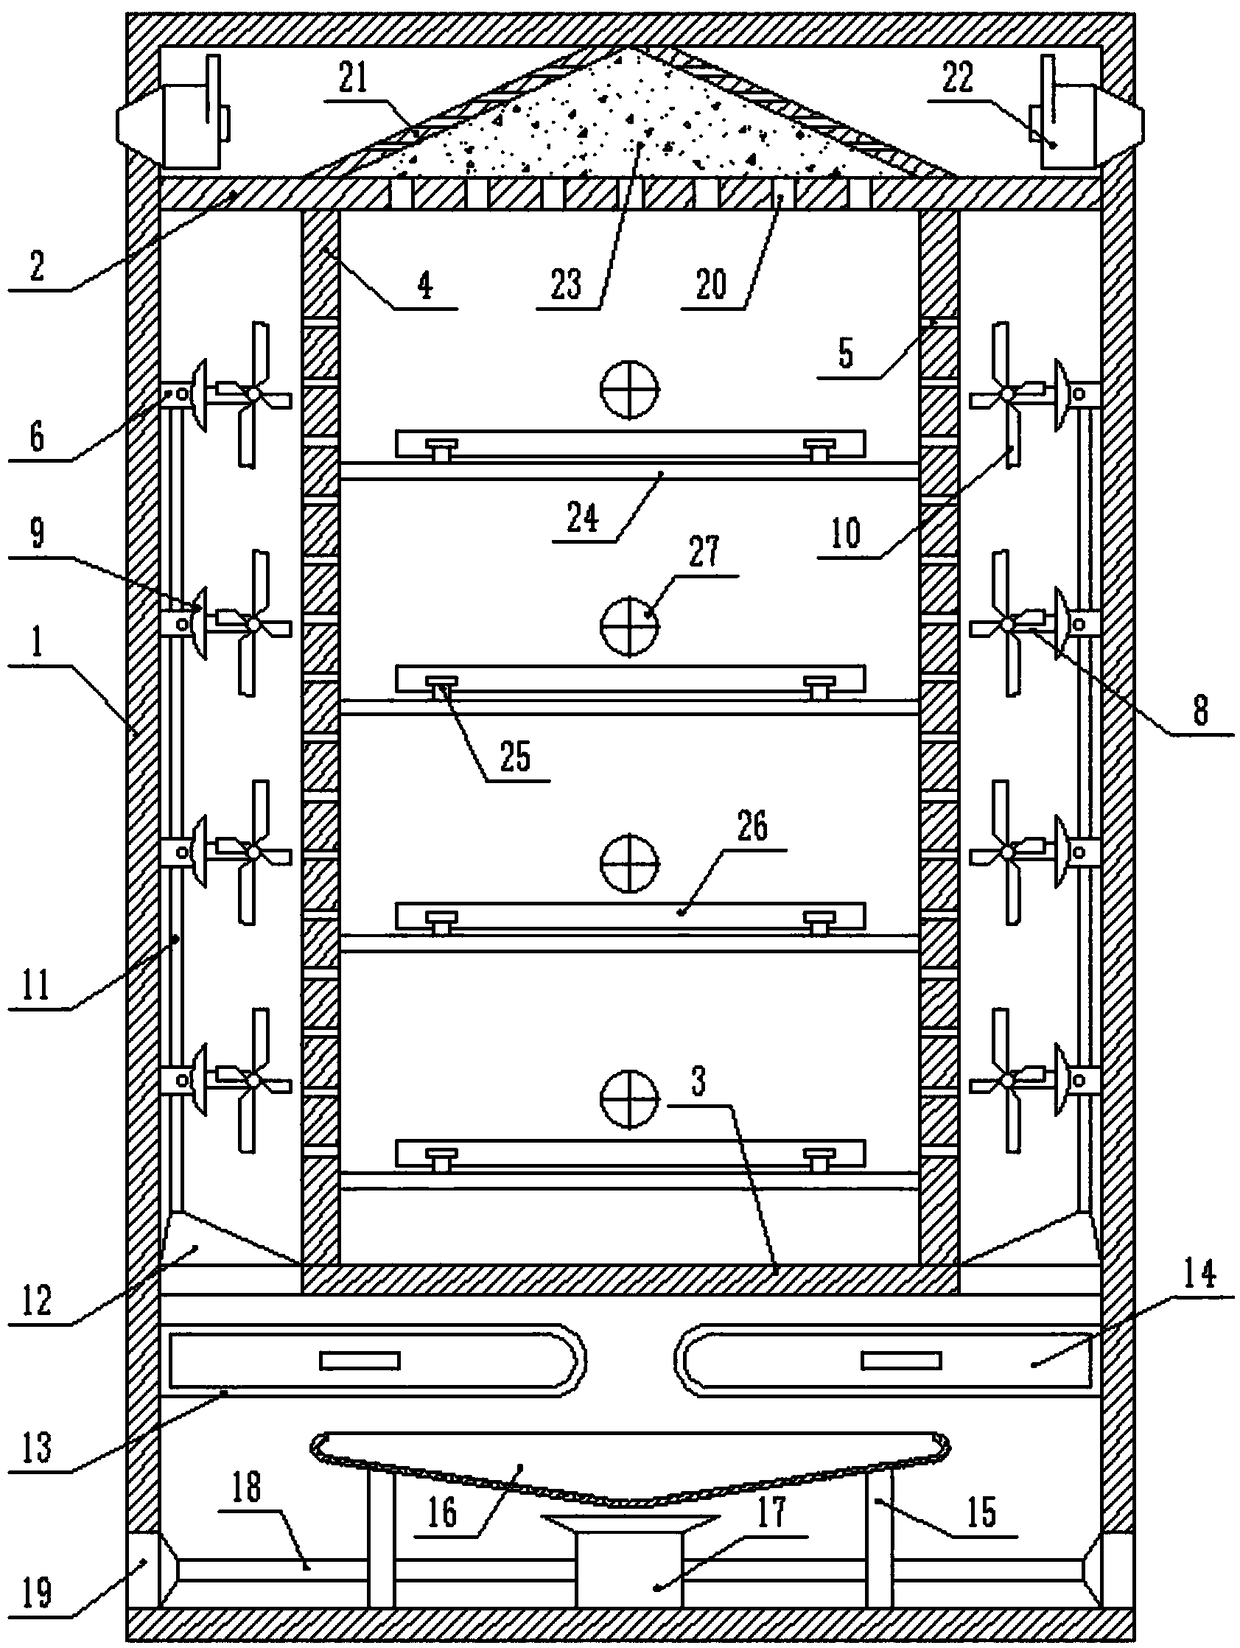 Cabinet-type computer server heat dissipation system